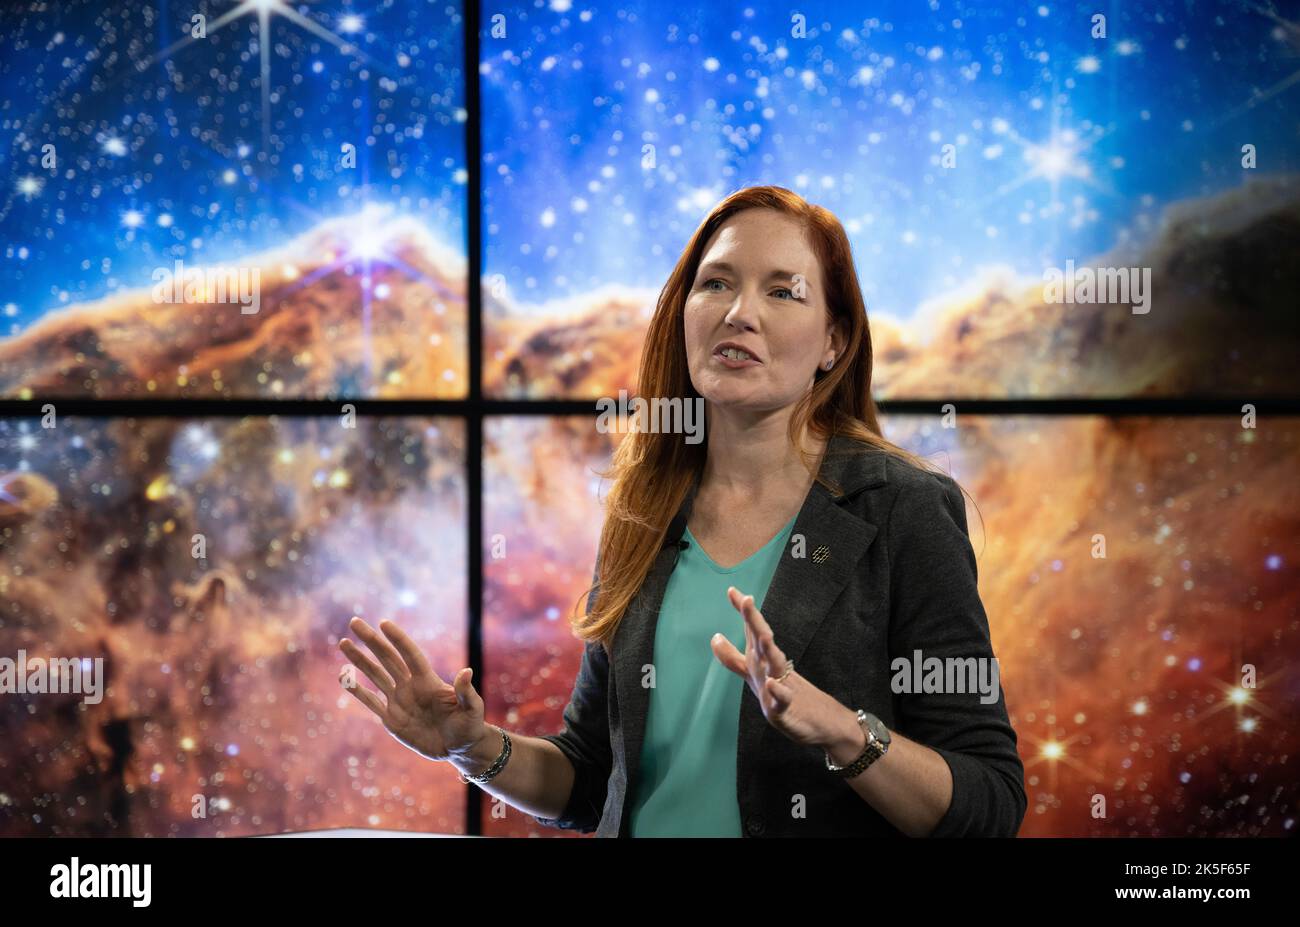 NASA James Webb Space Telescope Deputy Project Scientist for Communications Amber Straughn speaks about the infrared image of the star-forming region called NGC 3324 in the Carina Nebula as it is shown on a screen during a broadcast releasing the telescope’s first full-color images, Tuesday, July 12, 2022, at NASA’s Goddard Space Flight Center in Greenbelt, Md.  The first full-color images and spectroscopic data from the James Webb Space Telescope, a partnership with ESA (European Space Agency) and the Canadian Space Agency (CSA), are a demonstration of the power of Webb as the telescope begin Stock Photo